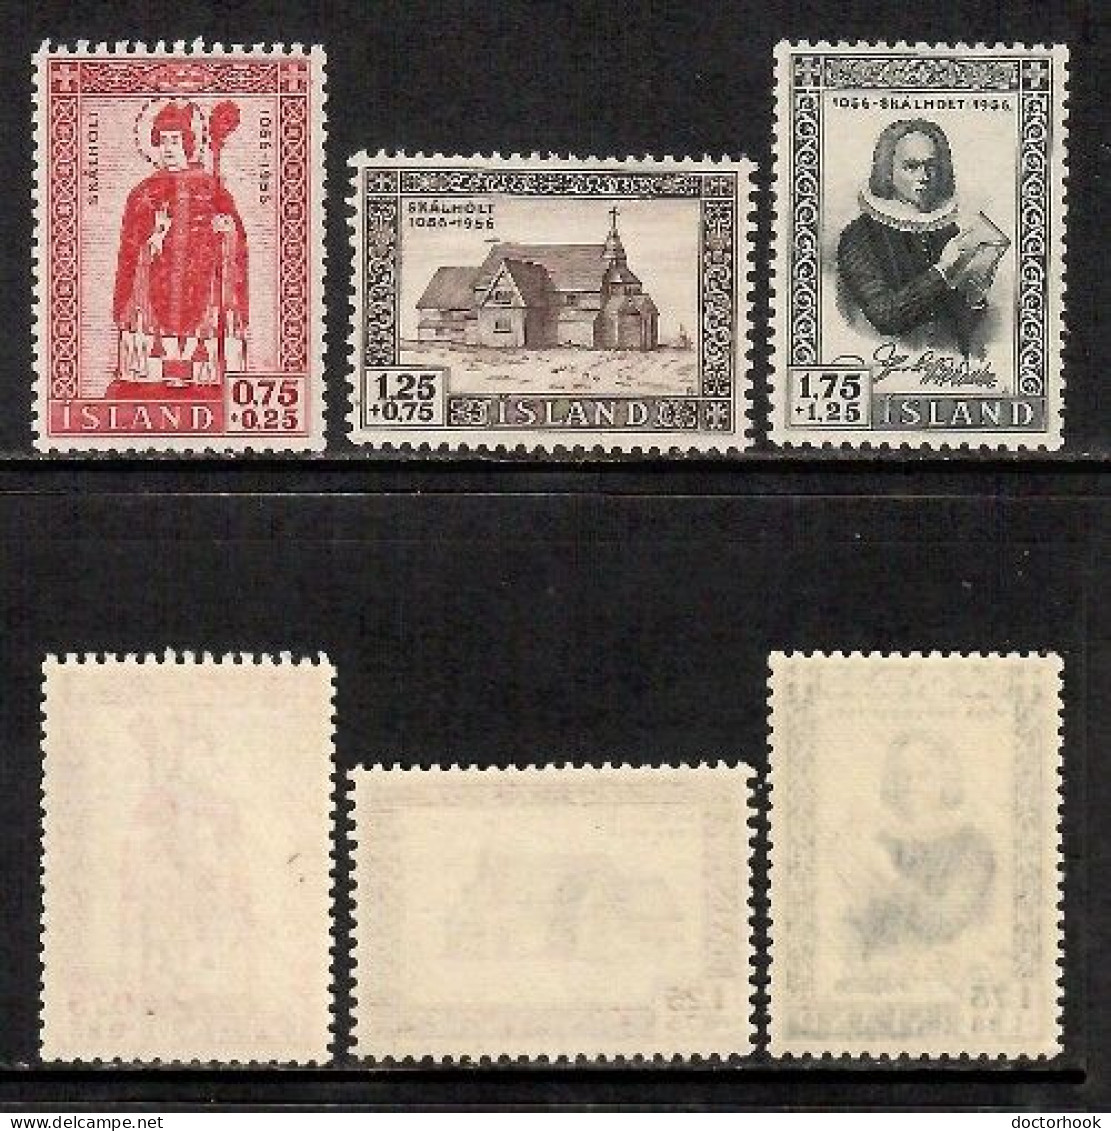 ICELAND   Scott # B 14-6** MINT NH (CONDITION AS PER SCAN) (Stamp Scan # 996-9) - Neufs